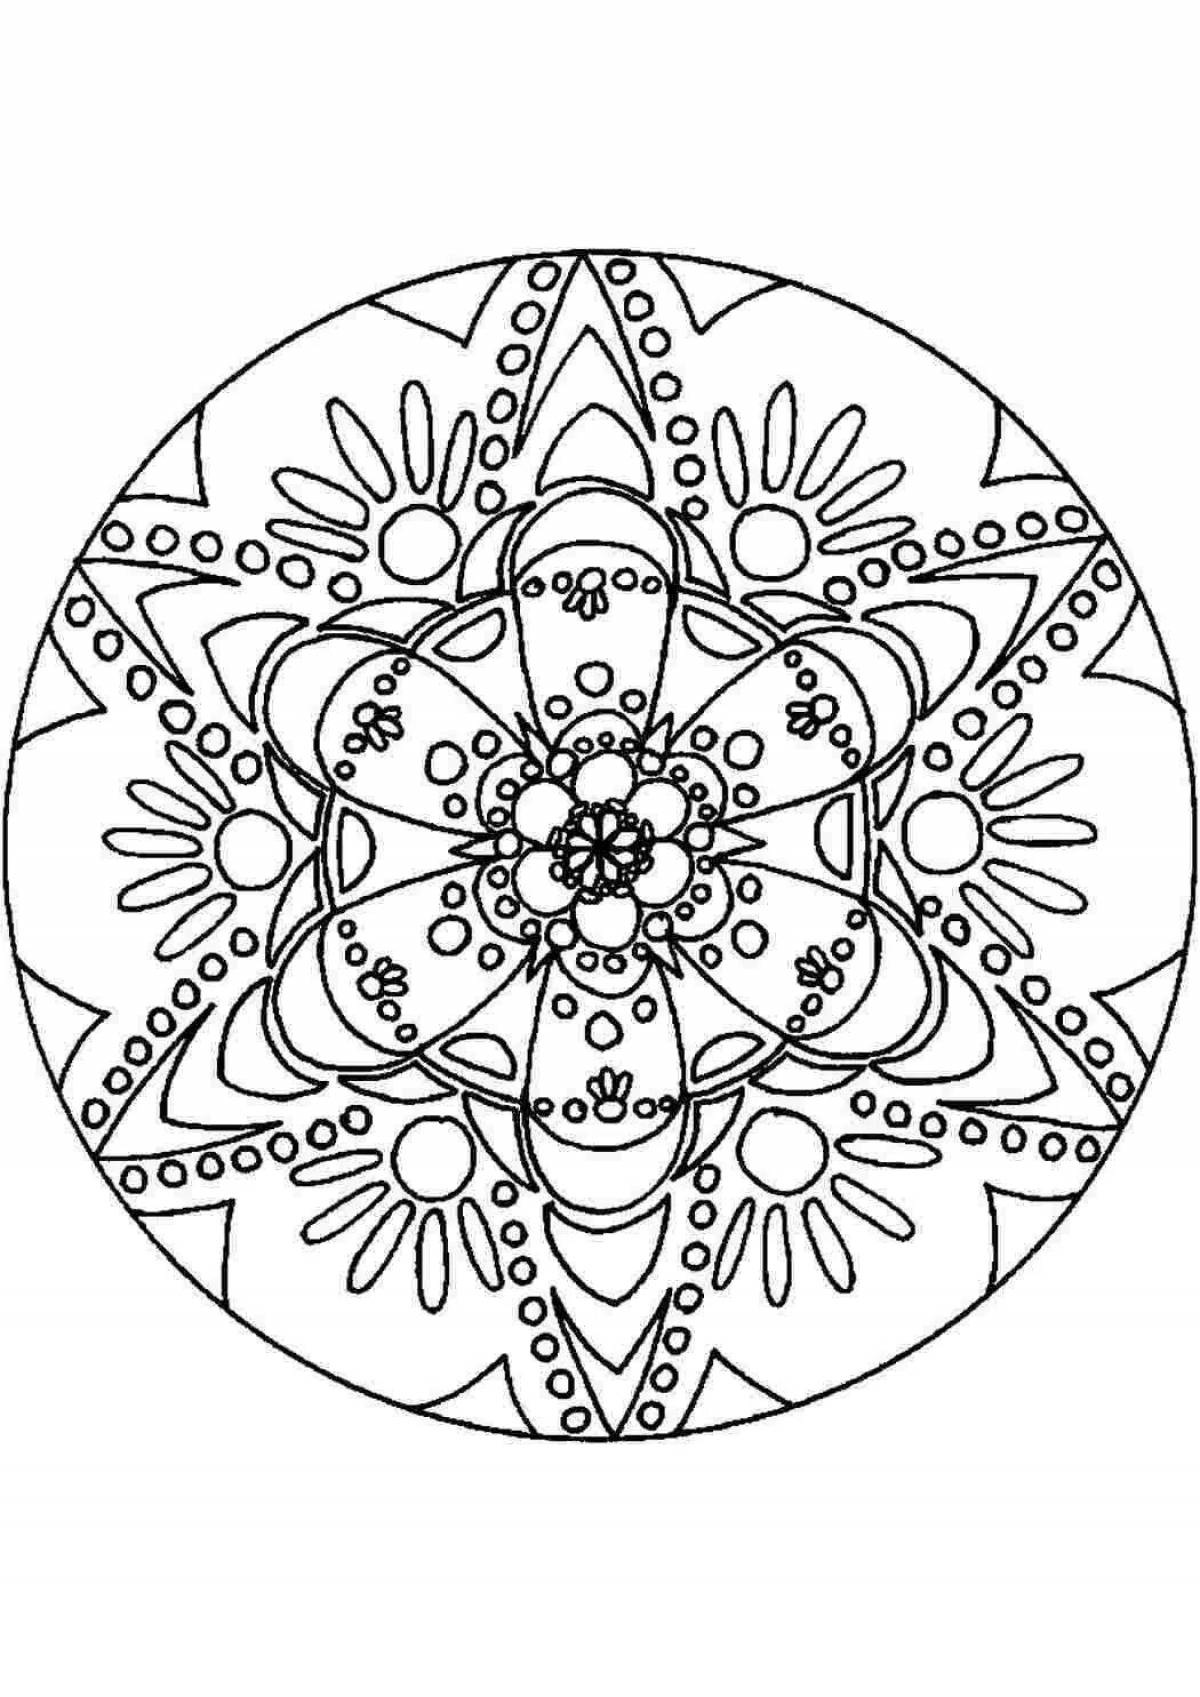 Exciting anti-stress mandala coloring pages for kids